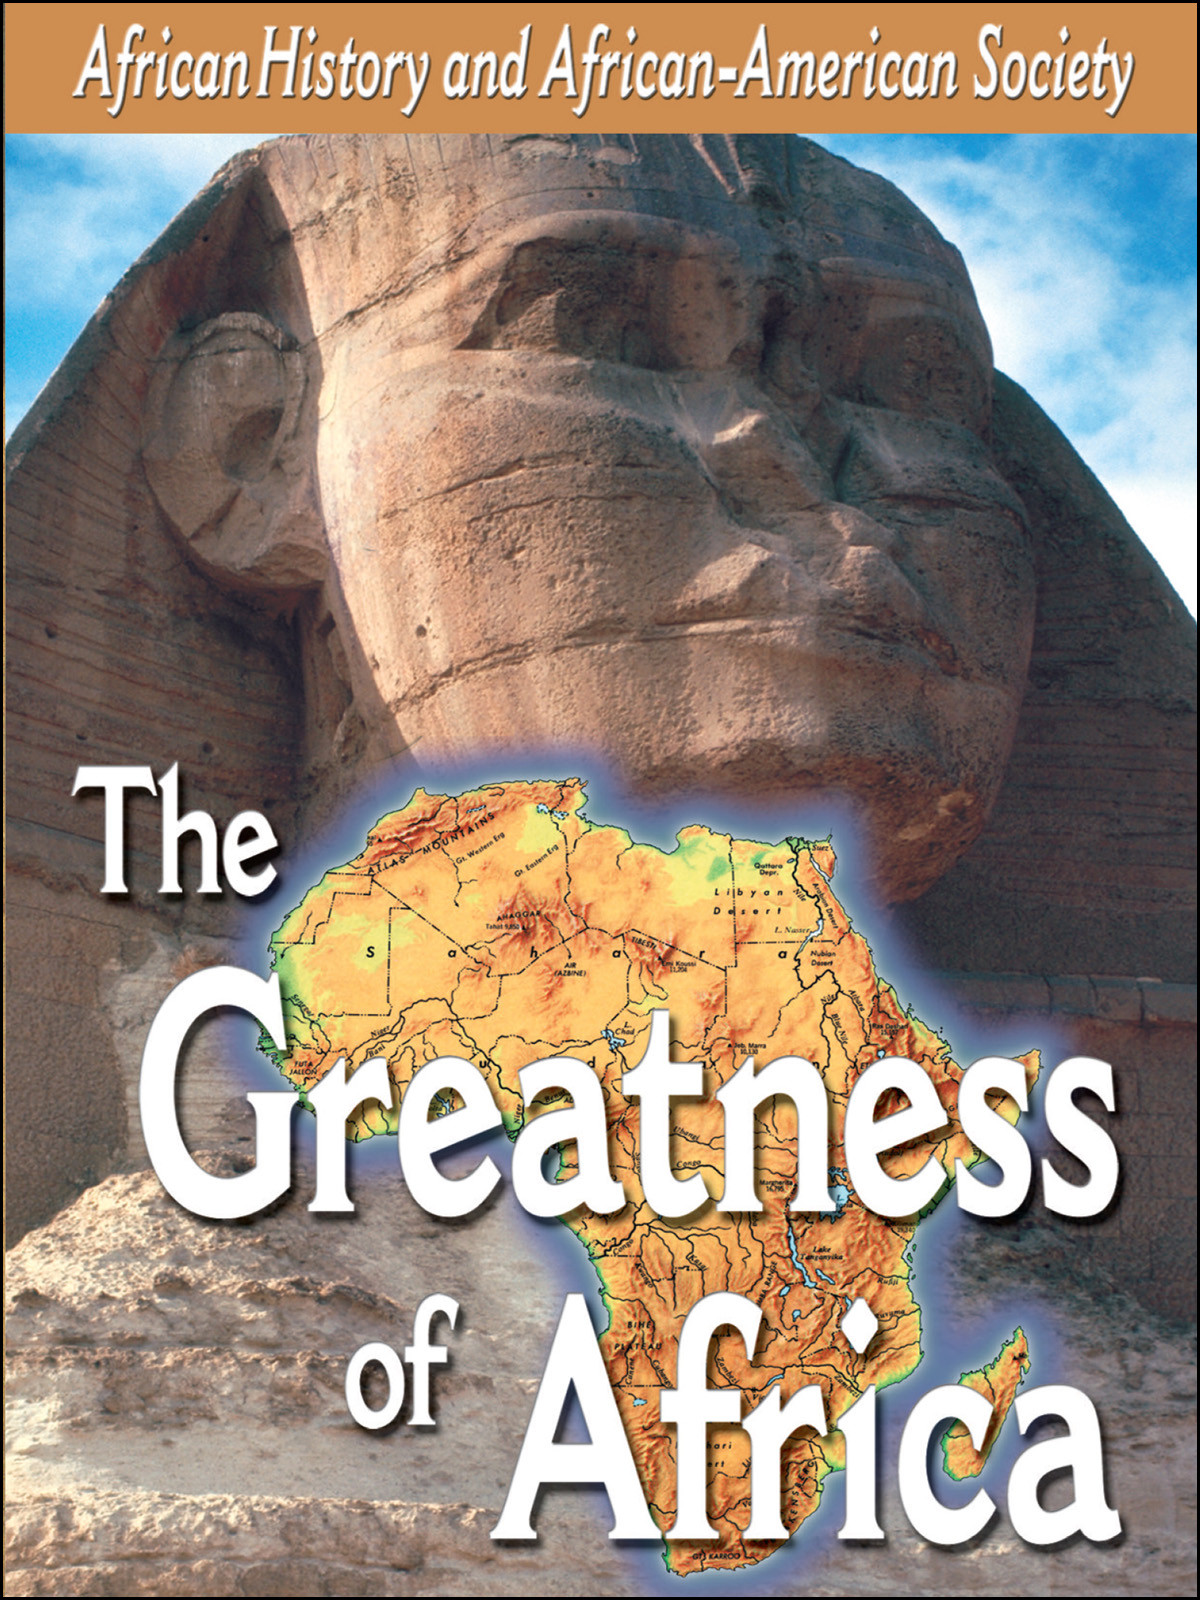 L902 - African-American History The Greatness of Africa